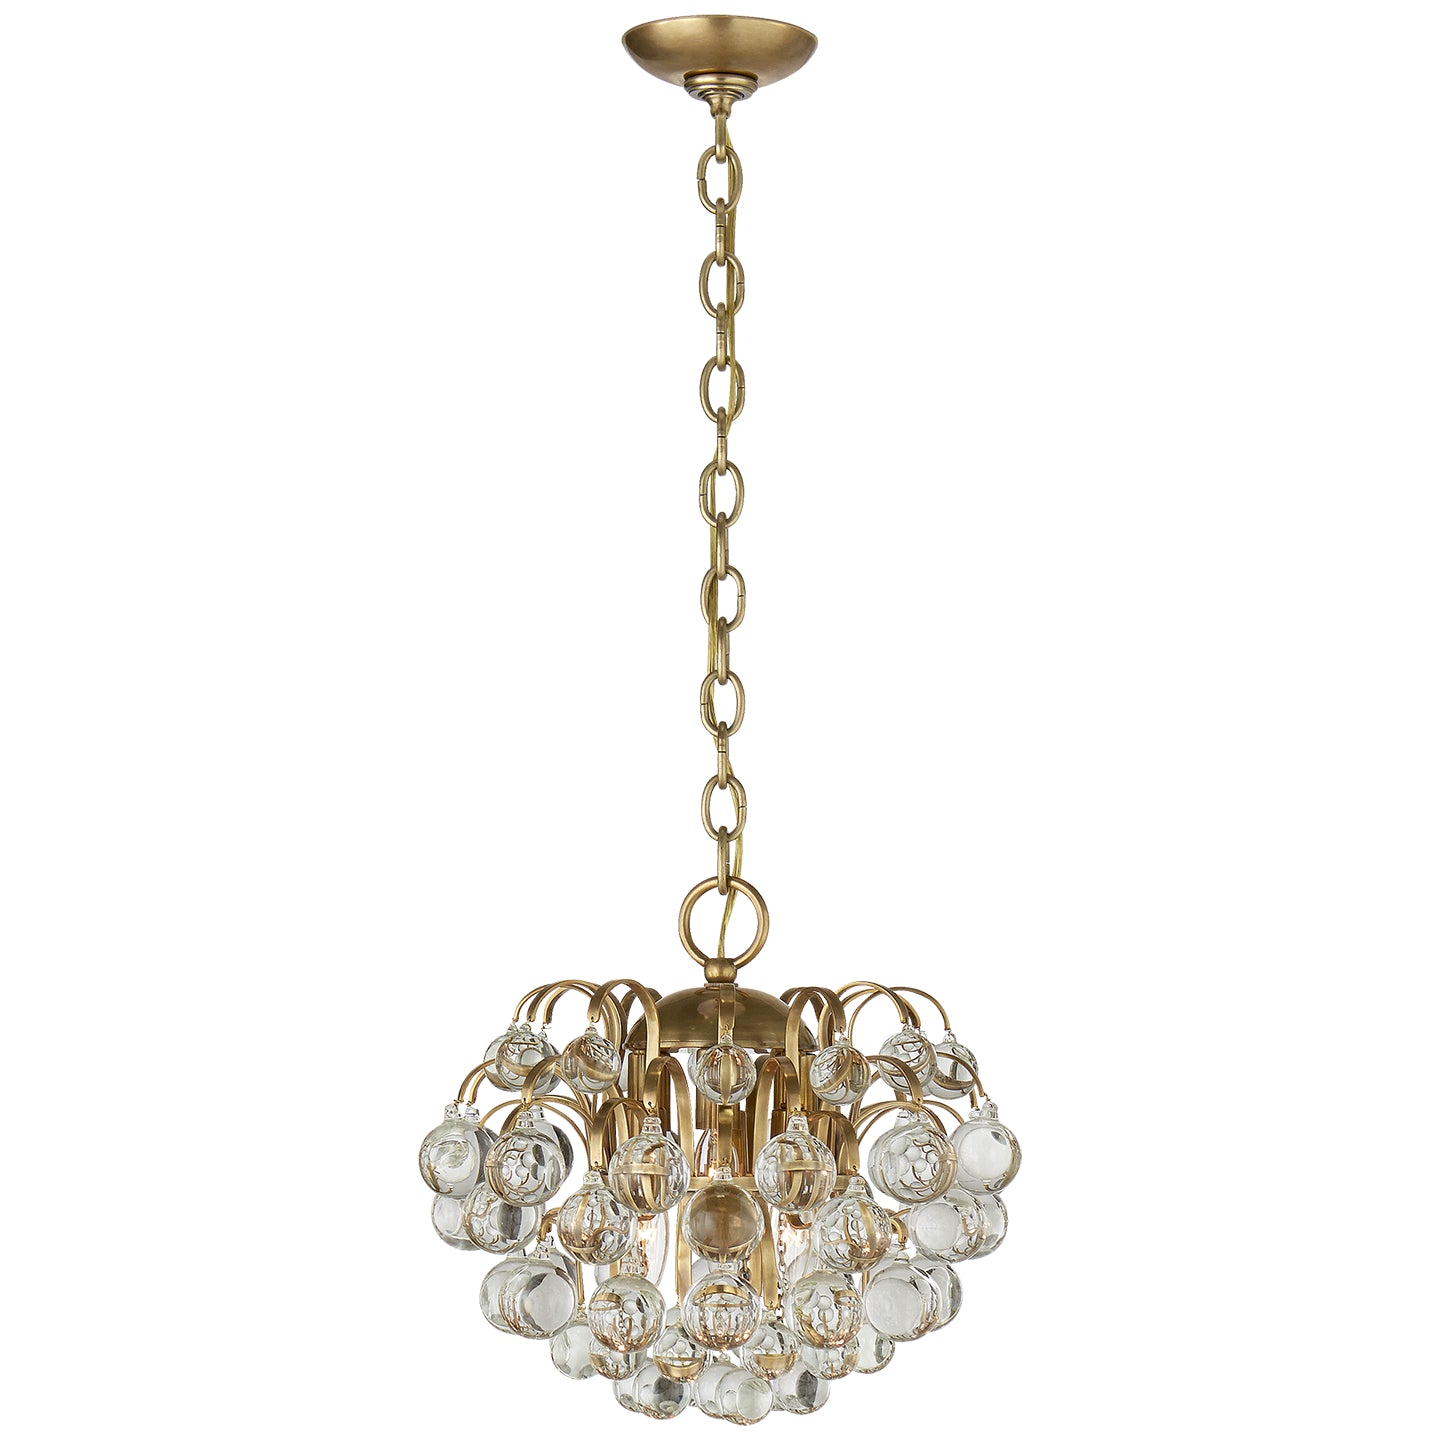 Load image into Gallery viewer, Visual Comfort Signature - ARN 5122HAB-CG - Six Light Chandelier - Bellvale - Hand-Rubbed Antique Brass
